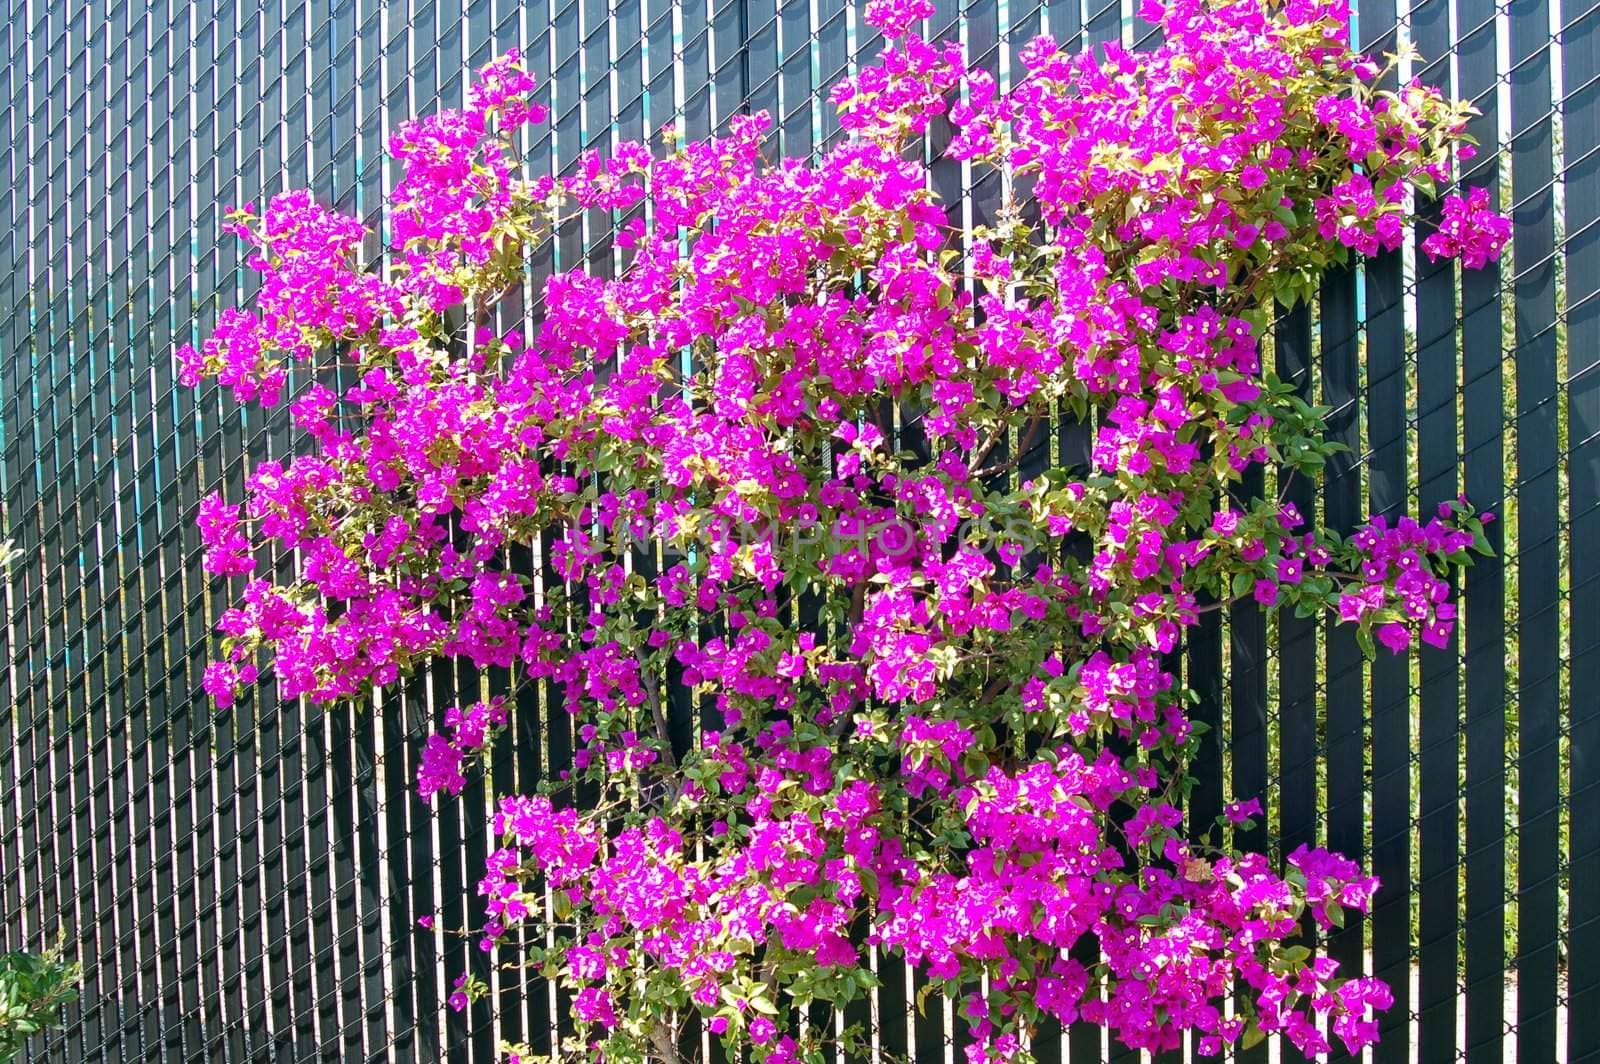 Blooming Bougainvillea Plant with bright pink flowers